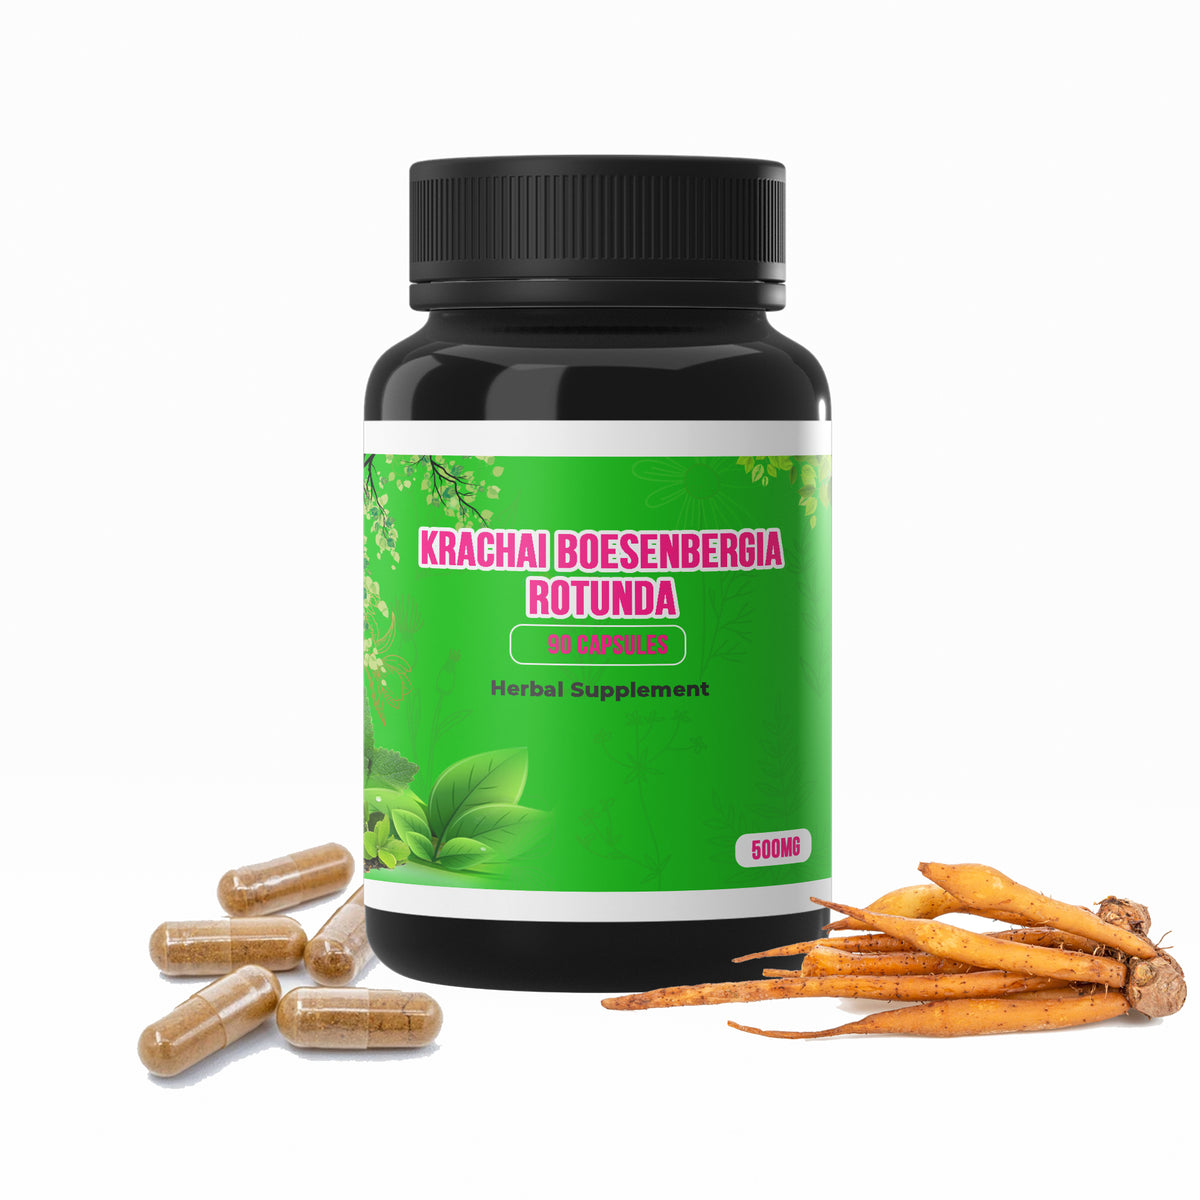 Krachai Boesenbergia Rotunda, Natural Herbal Dietary Supplements Herbs Thailand: Kra Chai, Boesenbergia Rotunda capsules. Kra Chai, Boesenbergia Rotunda capsules, anti flatulent, expels air and nurtures strength. Used as a general body tonic for male and fem